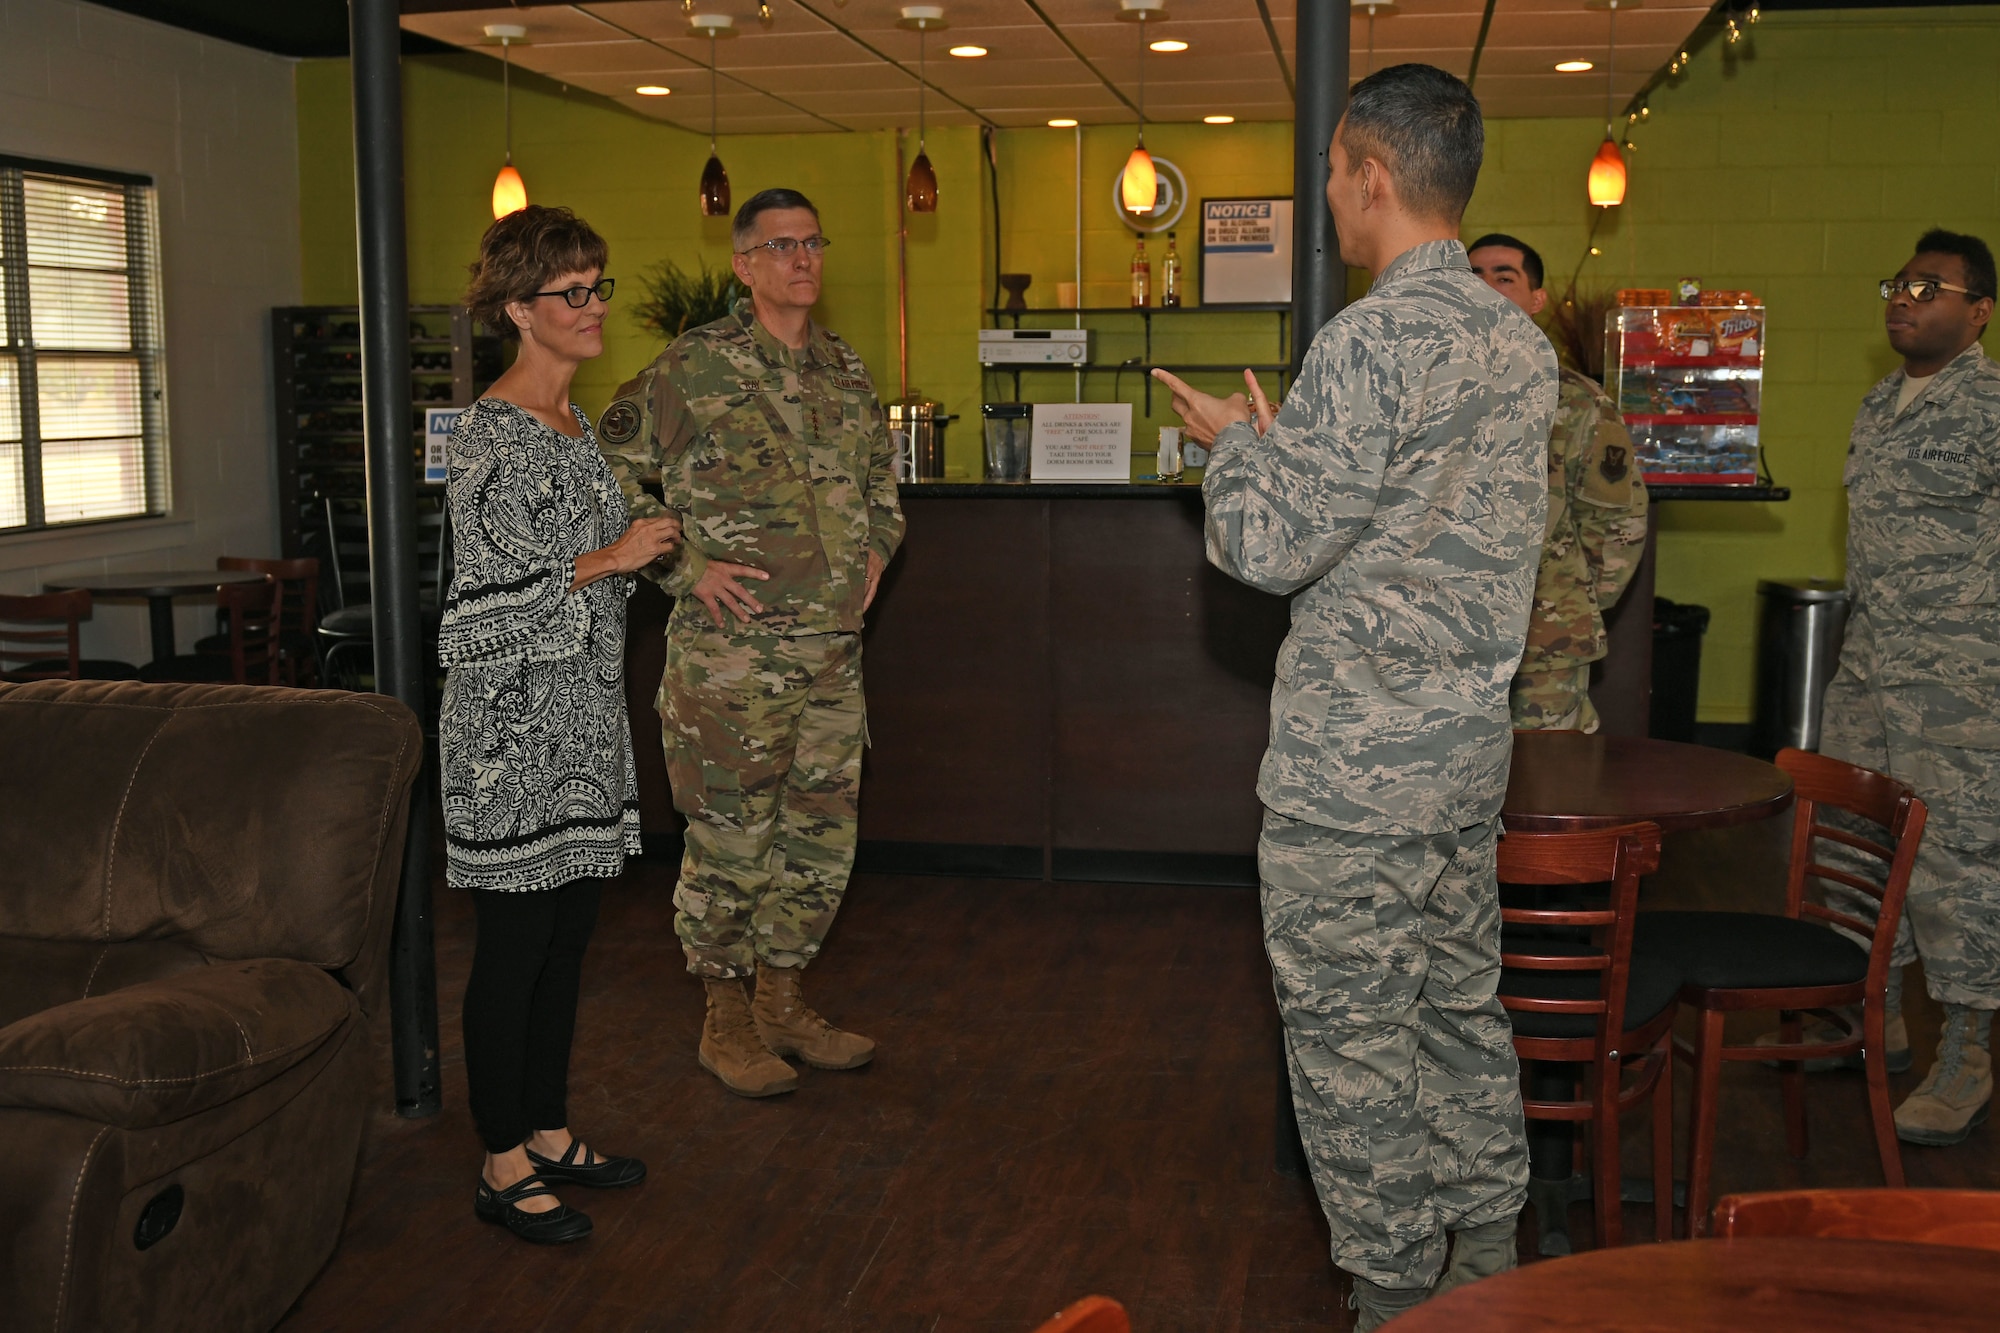 U.S. Air Force Capt. Bermsoo Kim, 7th Bomb Wing chaplain, explains the current ministry of the Soul Fire Cafe to Gen. Tim Ray, Commander of Air Force Global Strike Command, and his wife, Rhonda, at Dyess Air Force Base, Texas, Aug. 22, 2019. The Soul Fire Cafe was started by Ray, his wife and the chaplains while he was in command of the 7th BW in 2008, and was an effort to reach out and build connections between Airmen. (U.S. Air Force photo by Senior Airman Susan Roberts)